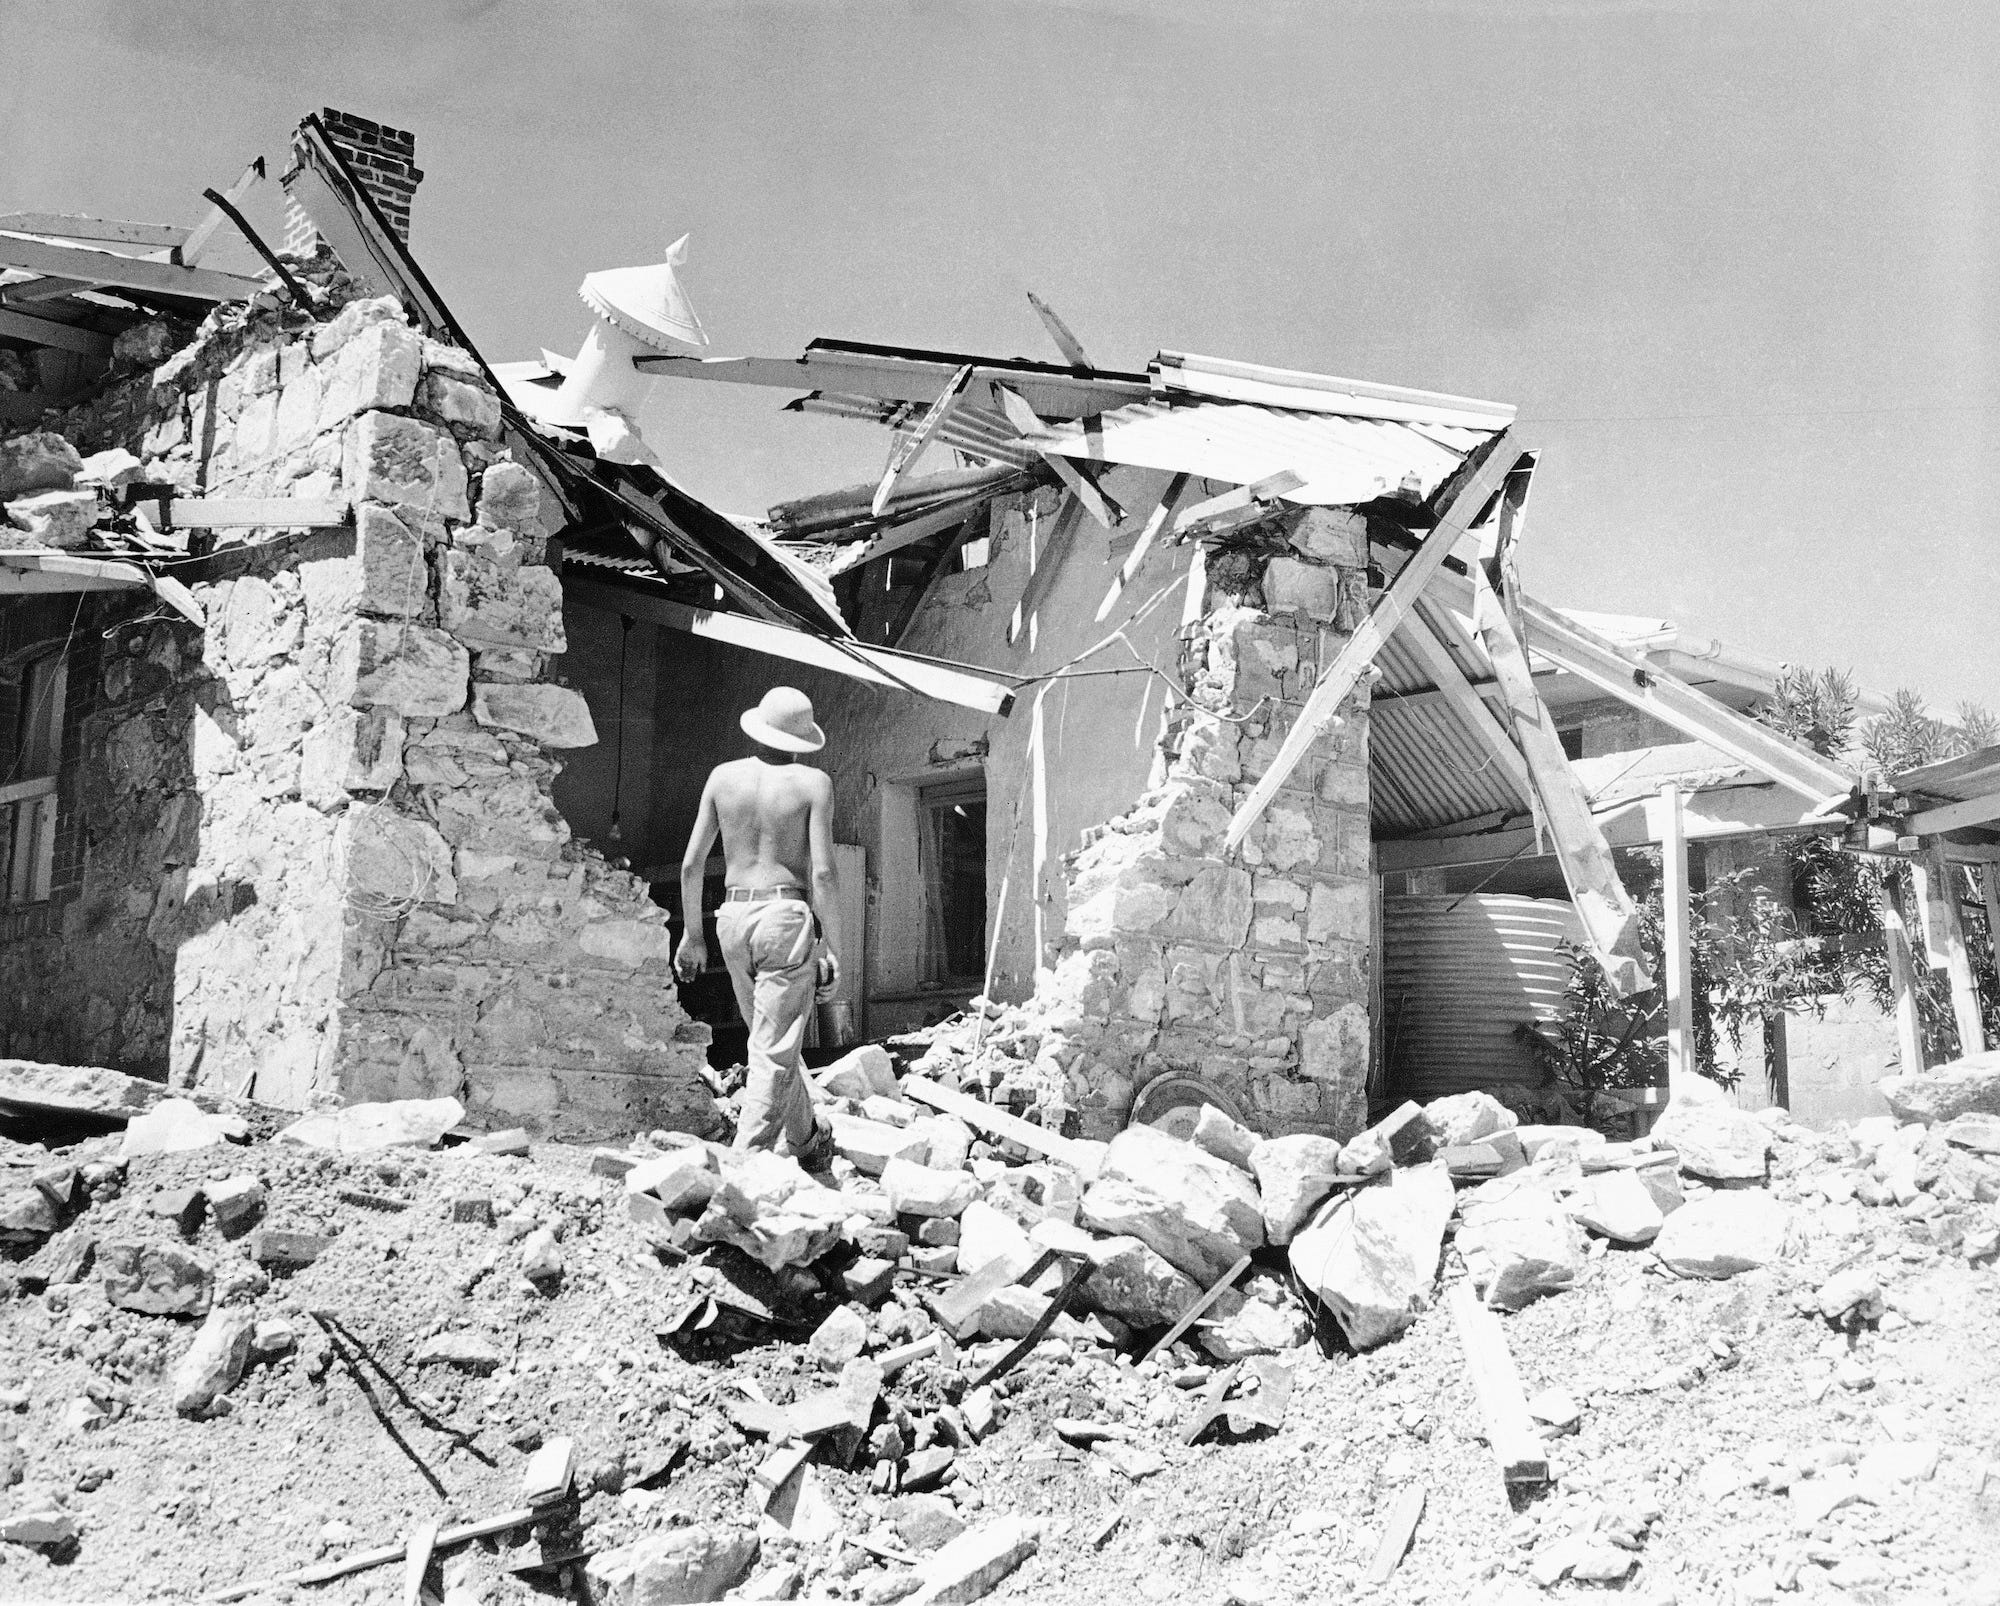 Darwin home destroyed in WWII Japanese raid